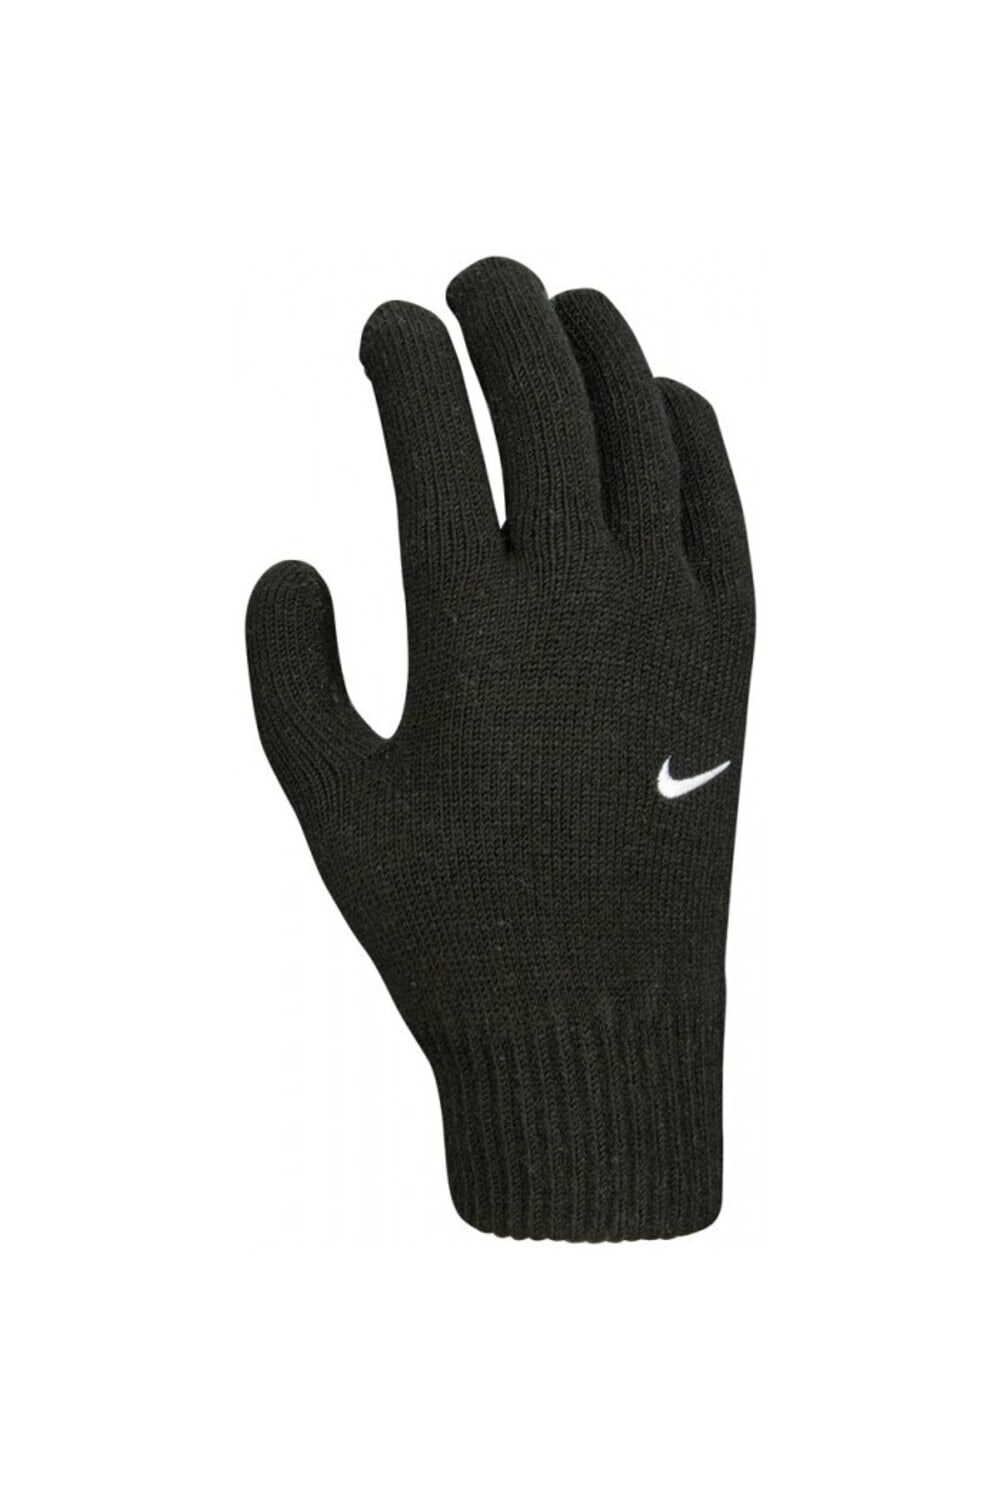 Swoosh 2. 0 Kids Knitted Gloves -